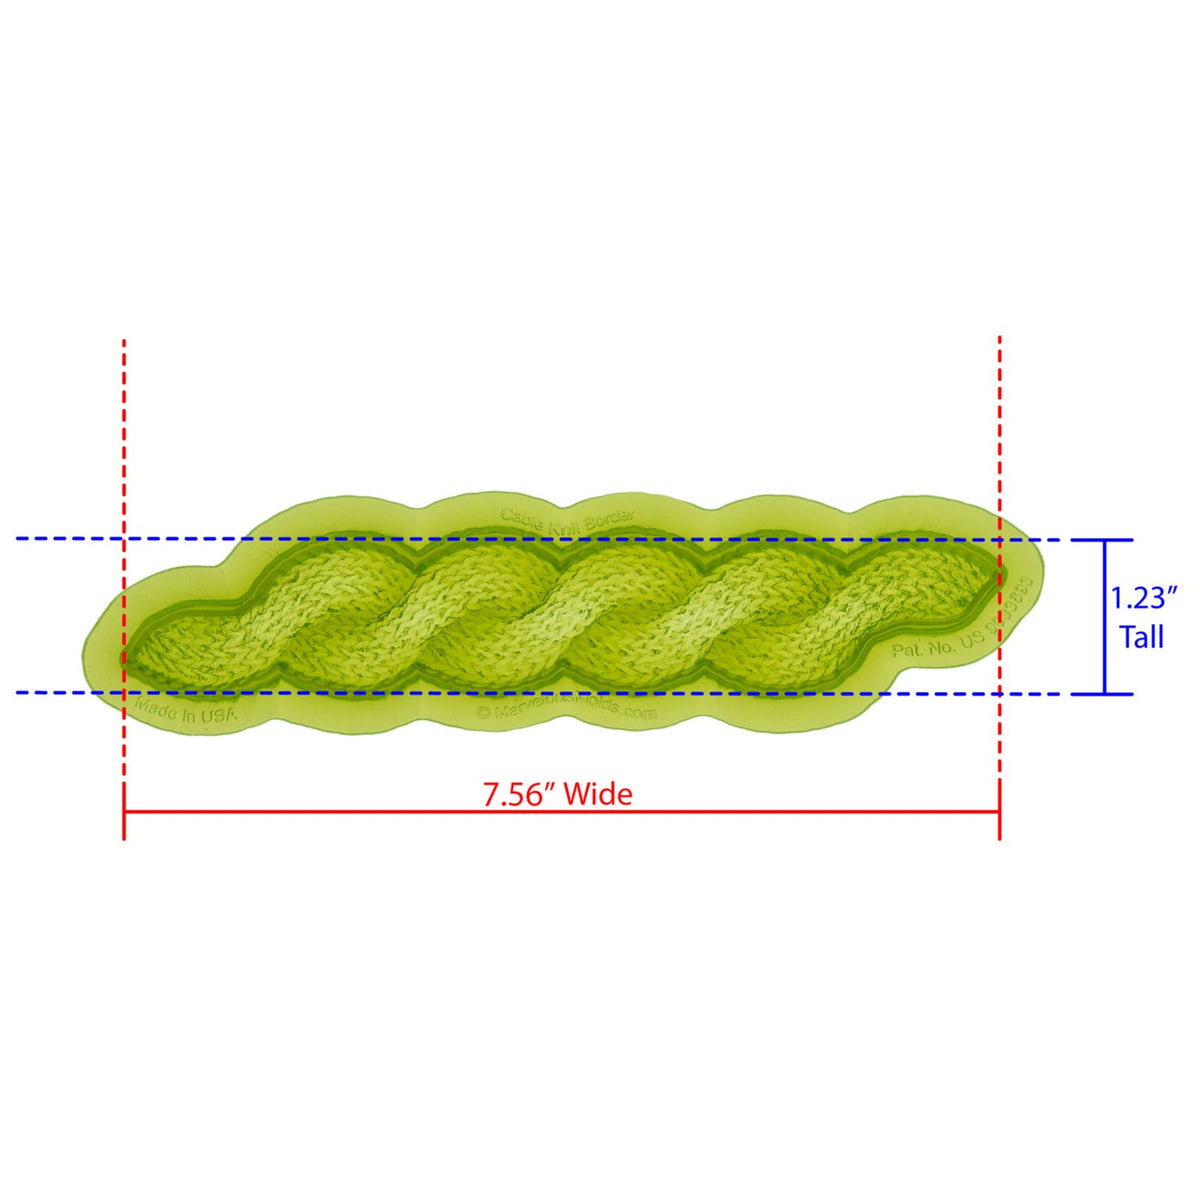 Cable Knit Border Silicone Mold Cavity Measures 7.56 inches wide by 1.23 inches tall, proudly Made in USA